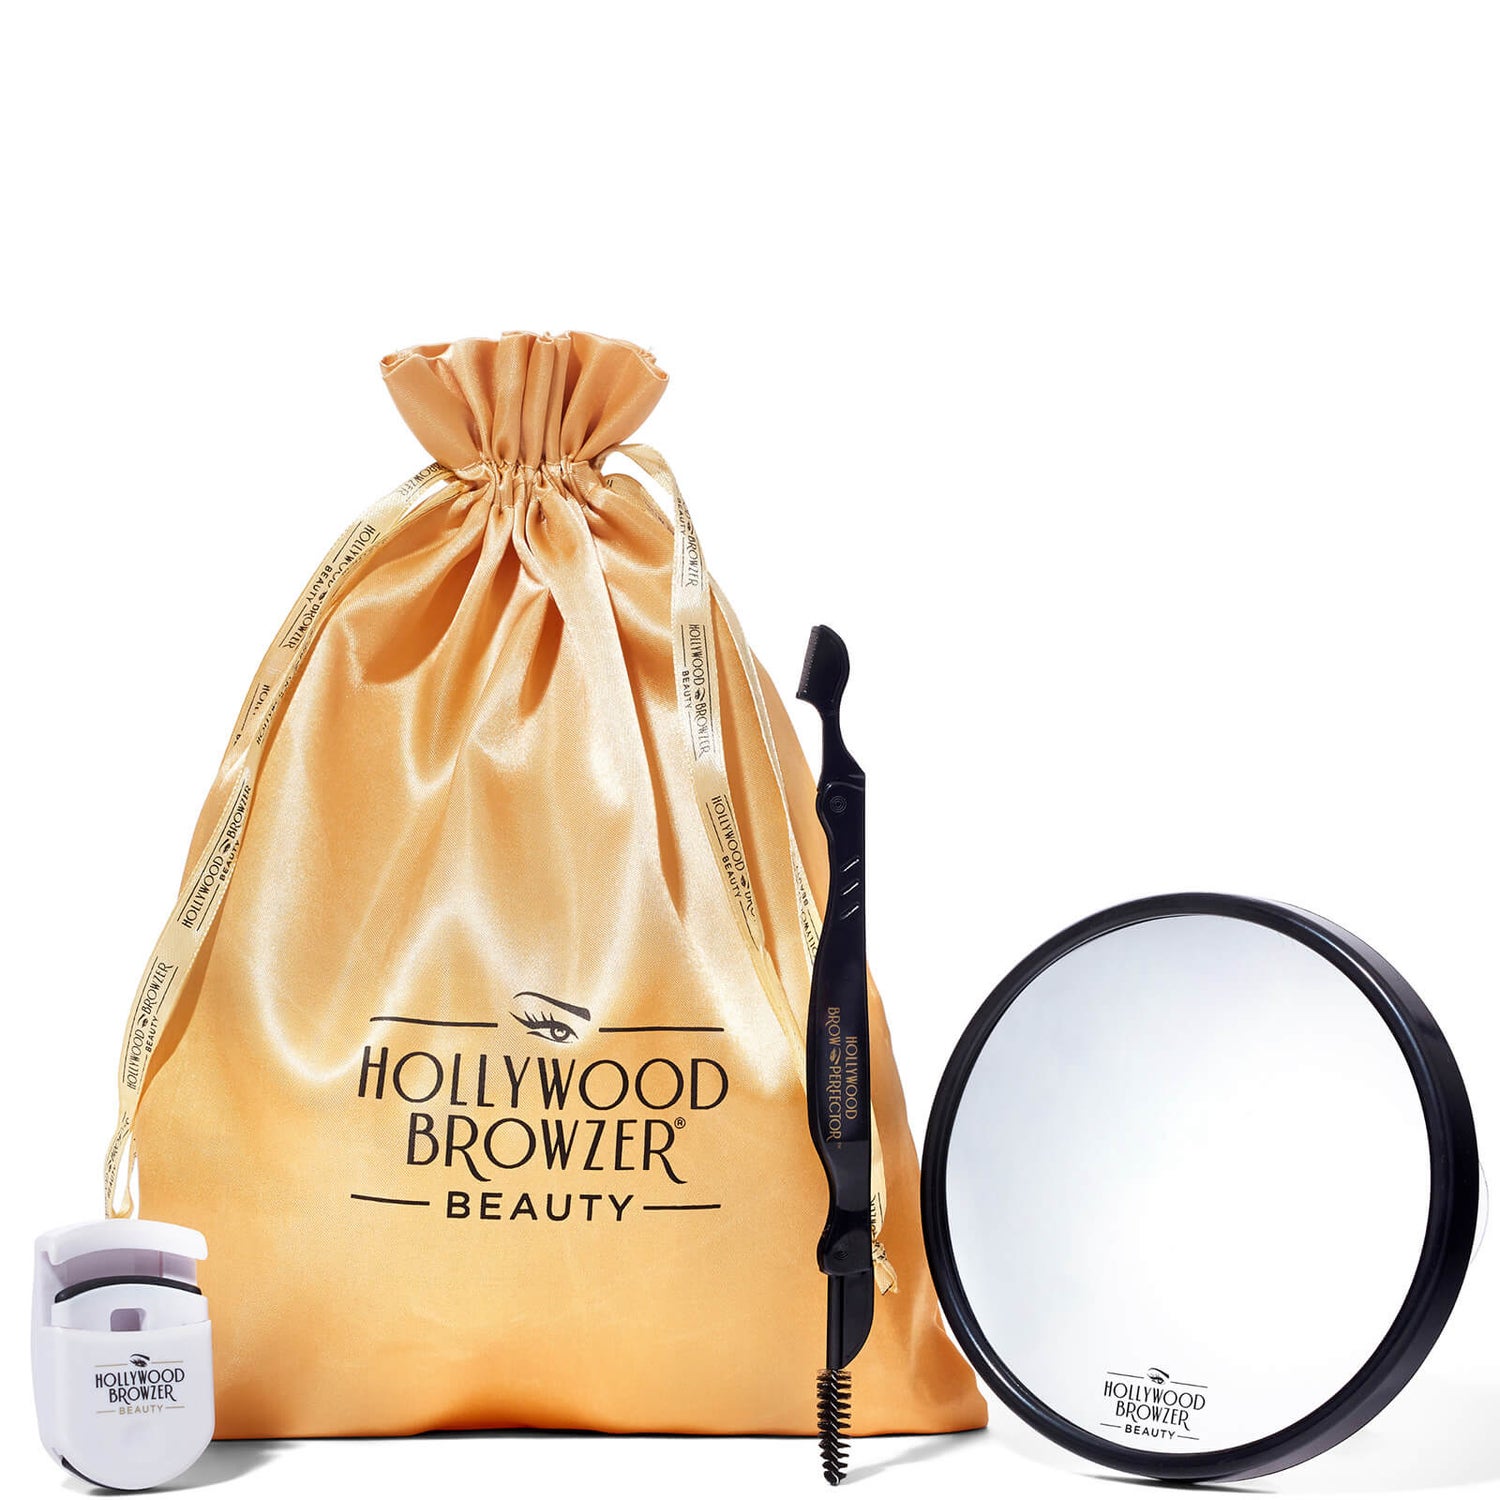 Hollywood Browzer Exclusive Lash and Brow Perfection Kit